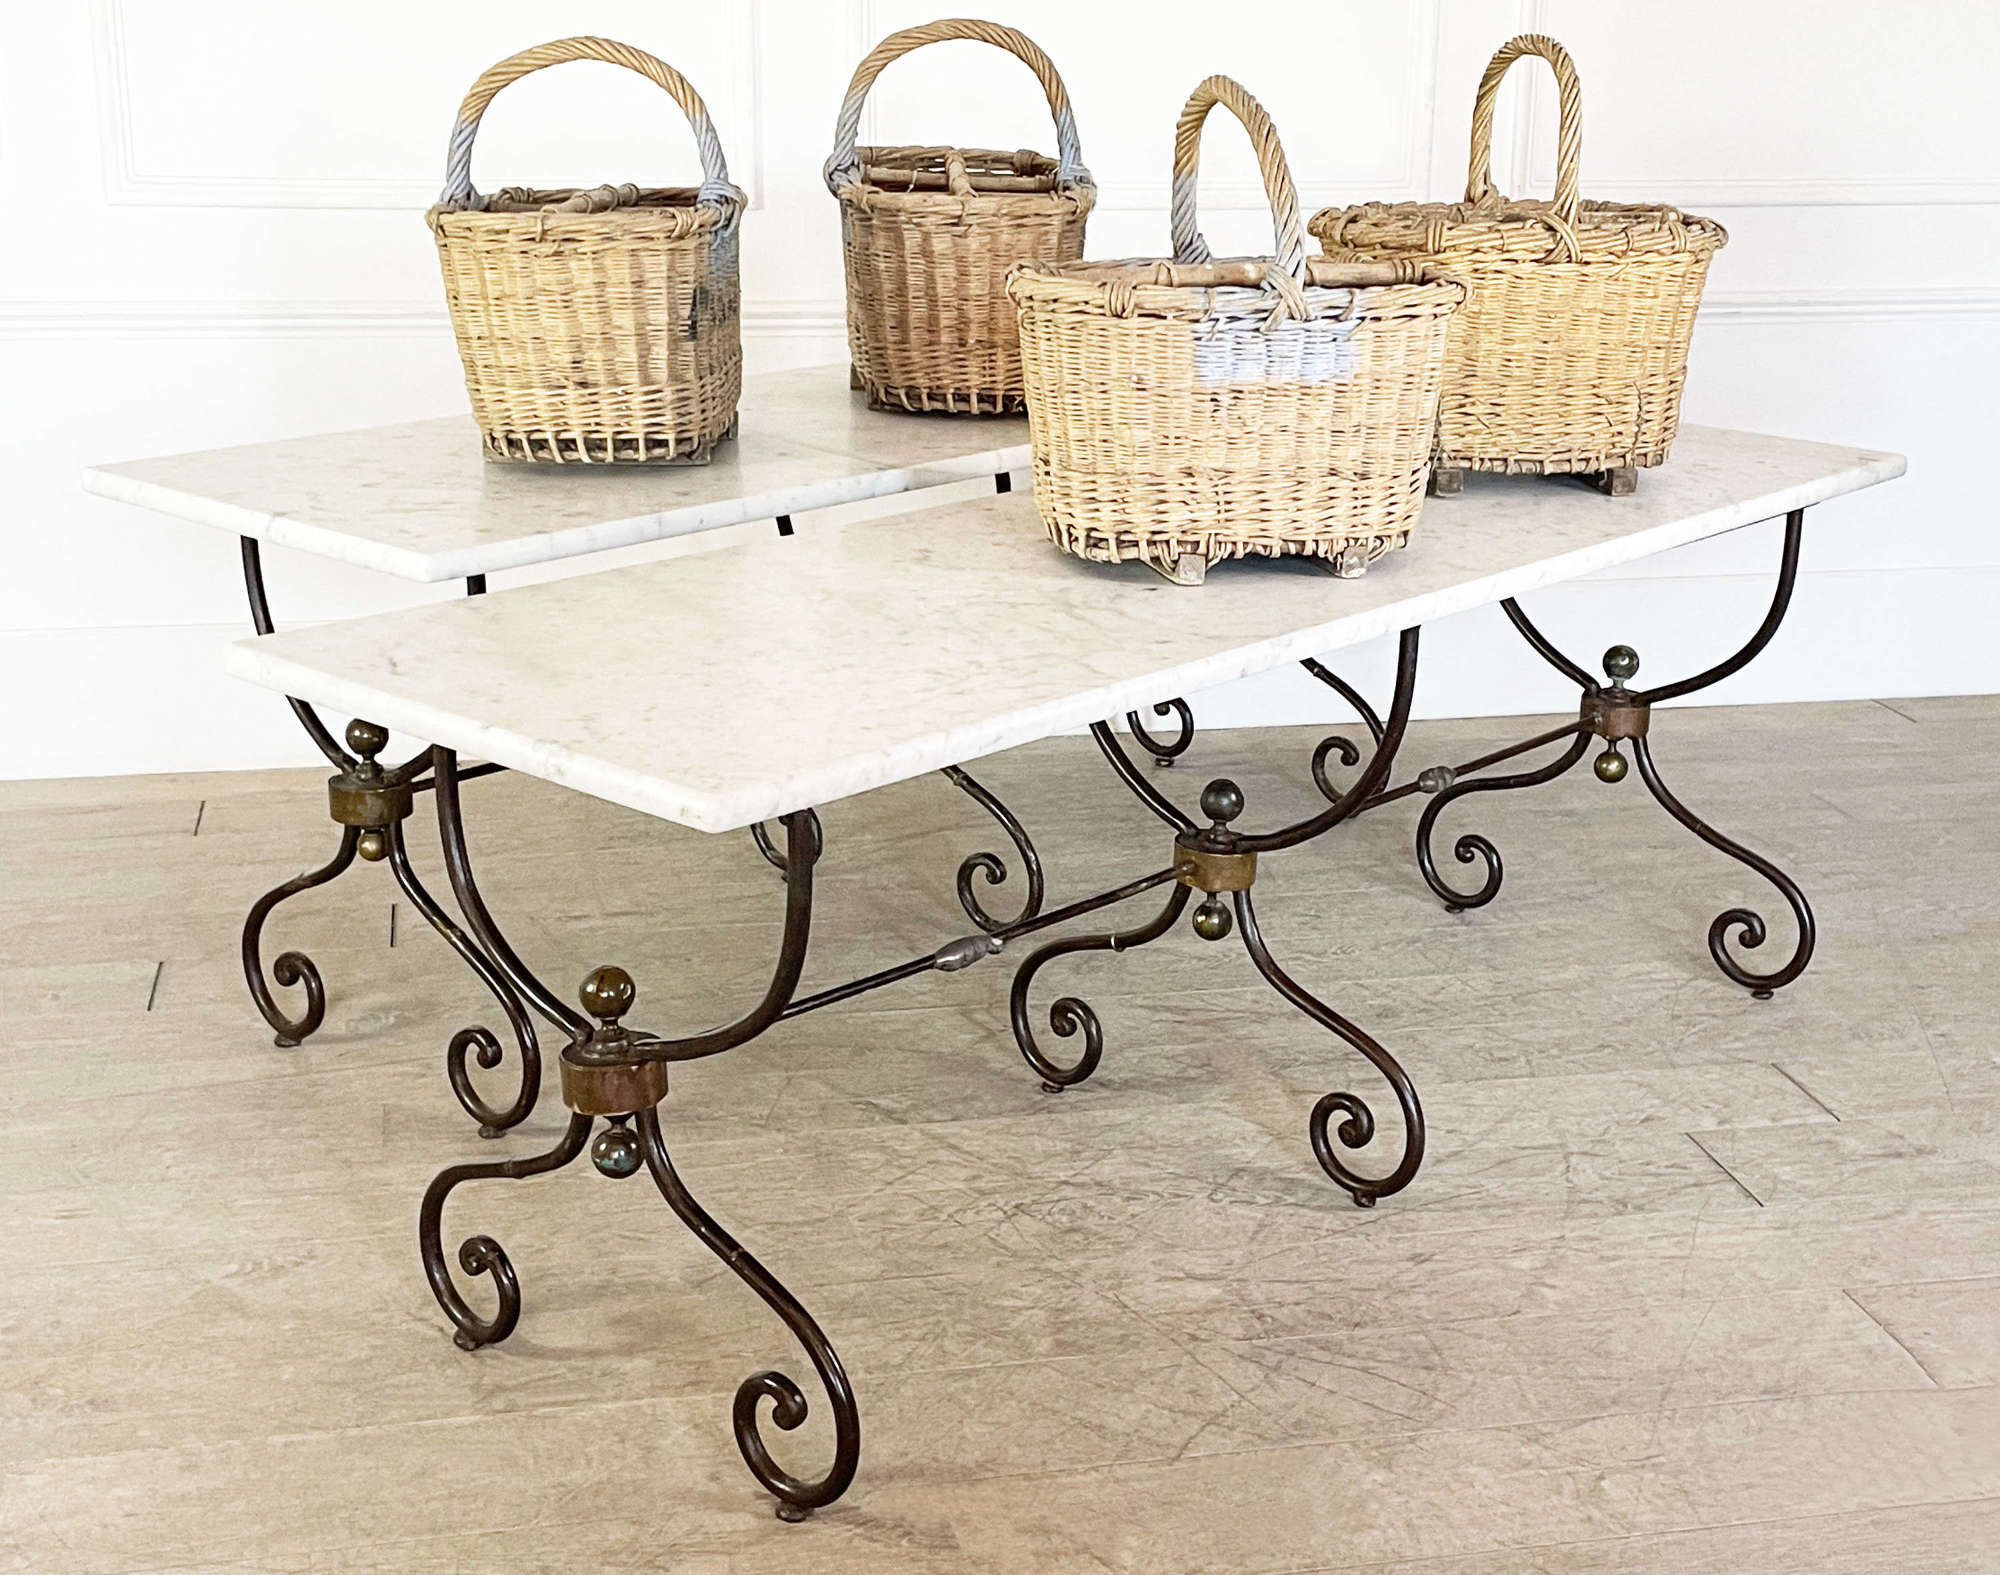 Pair of French Wrought iron Tables with Carrara Marble Tops-circa 1860